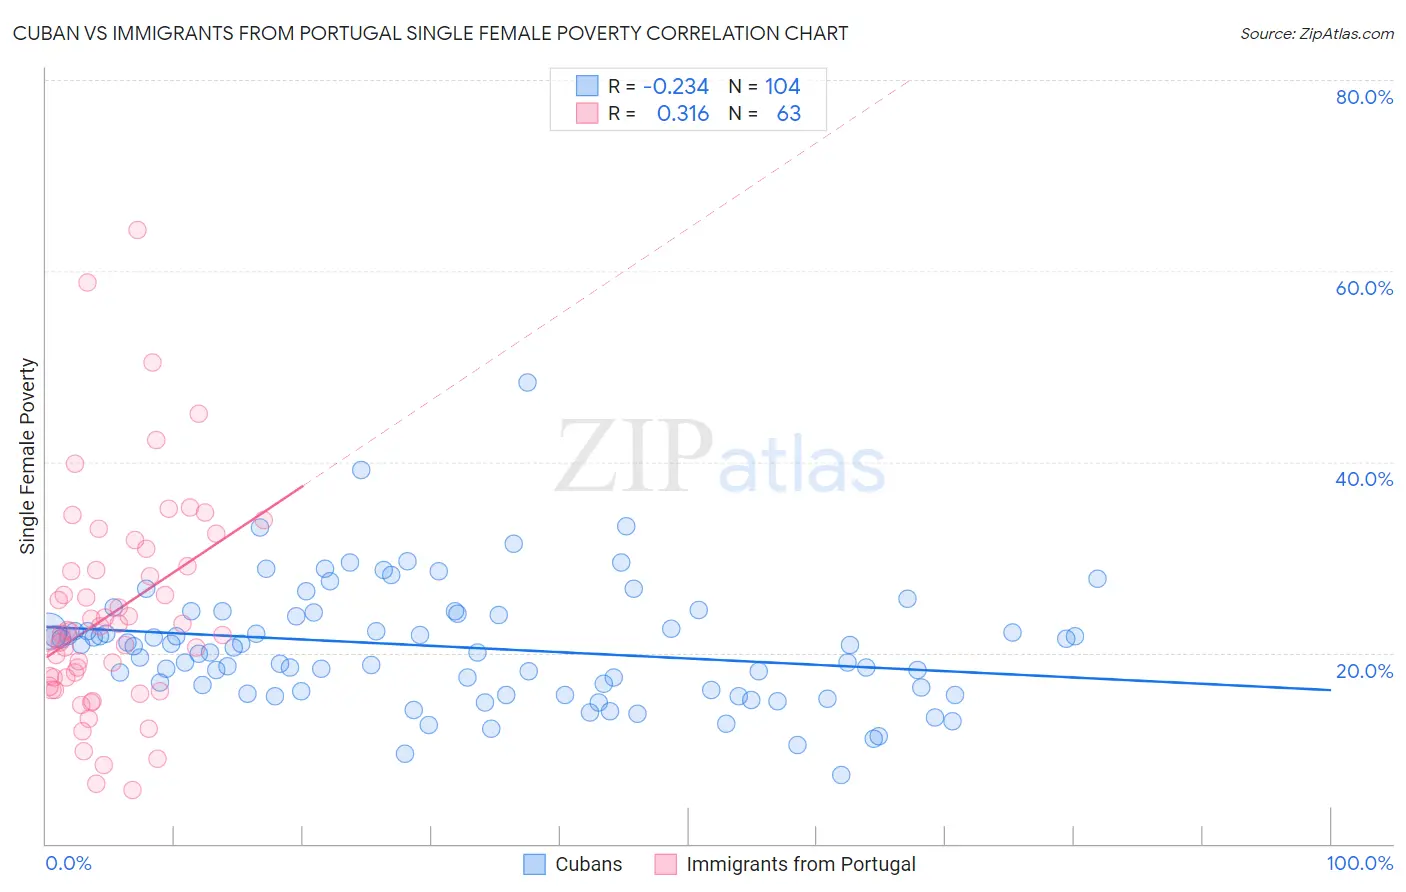 Cuban vs Immigrants from Portugal Single Female Poverty